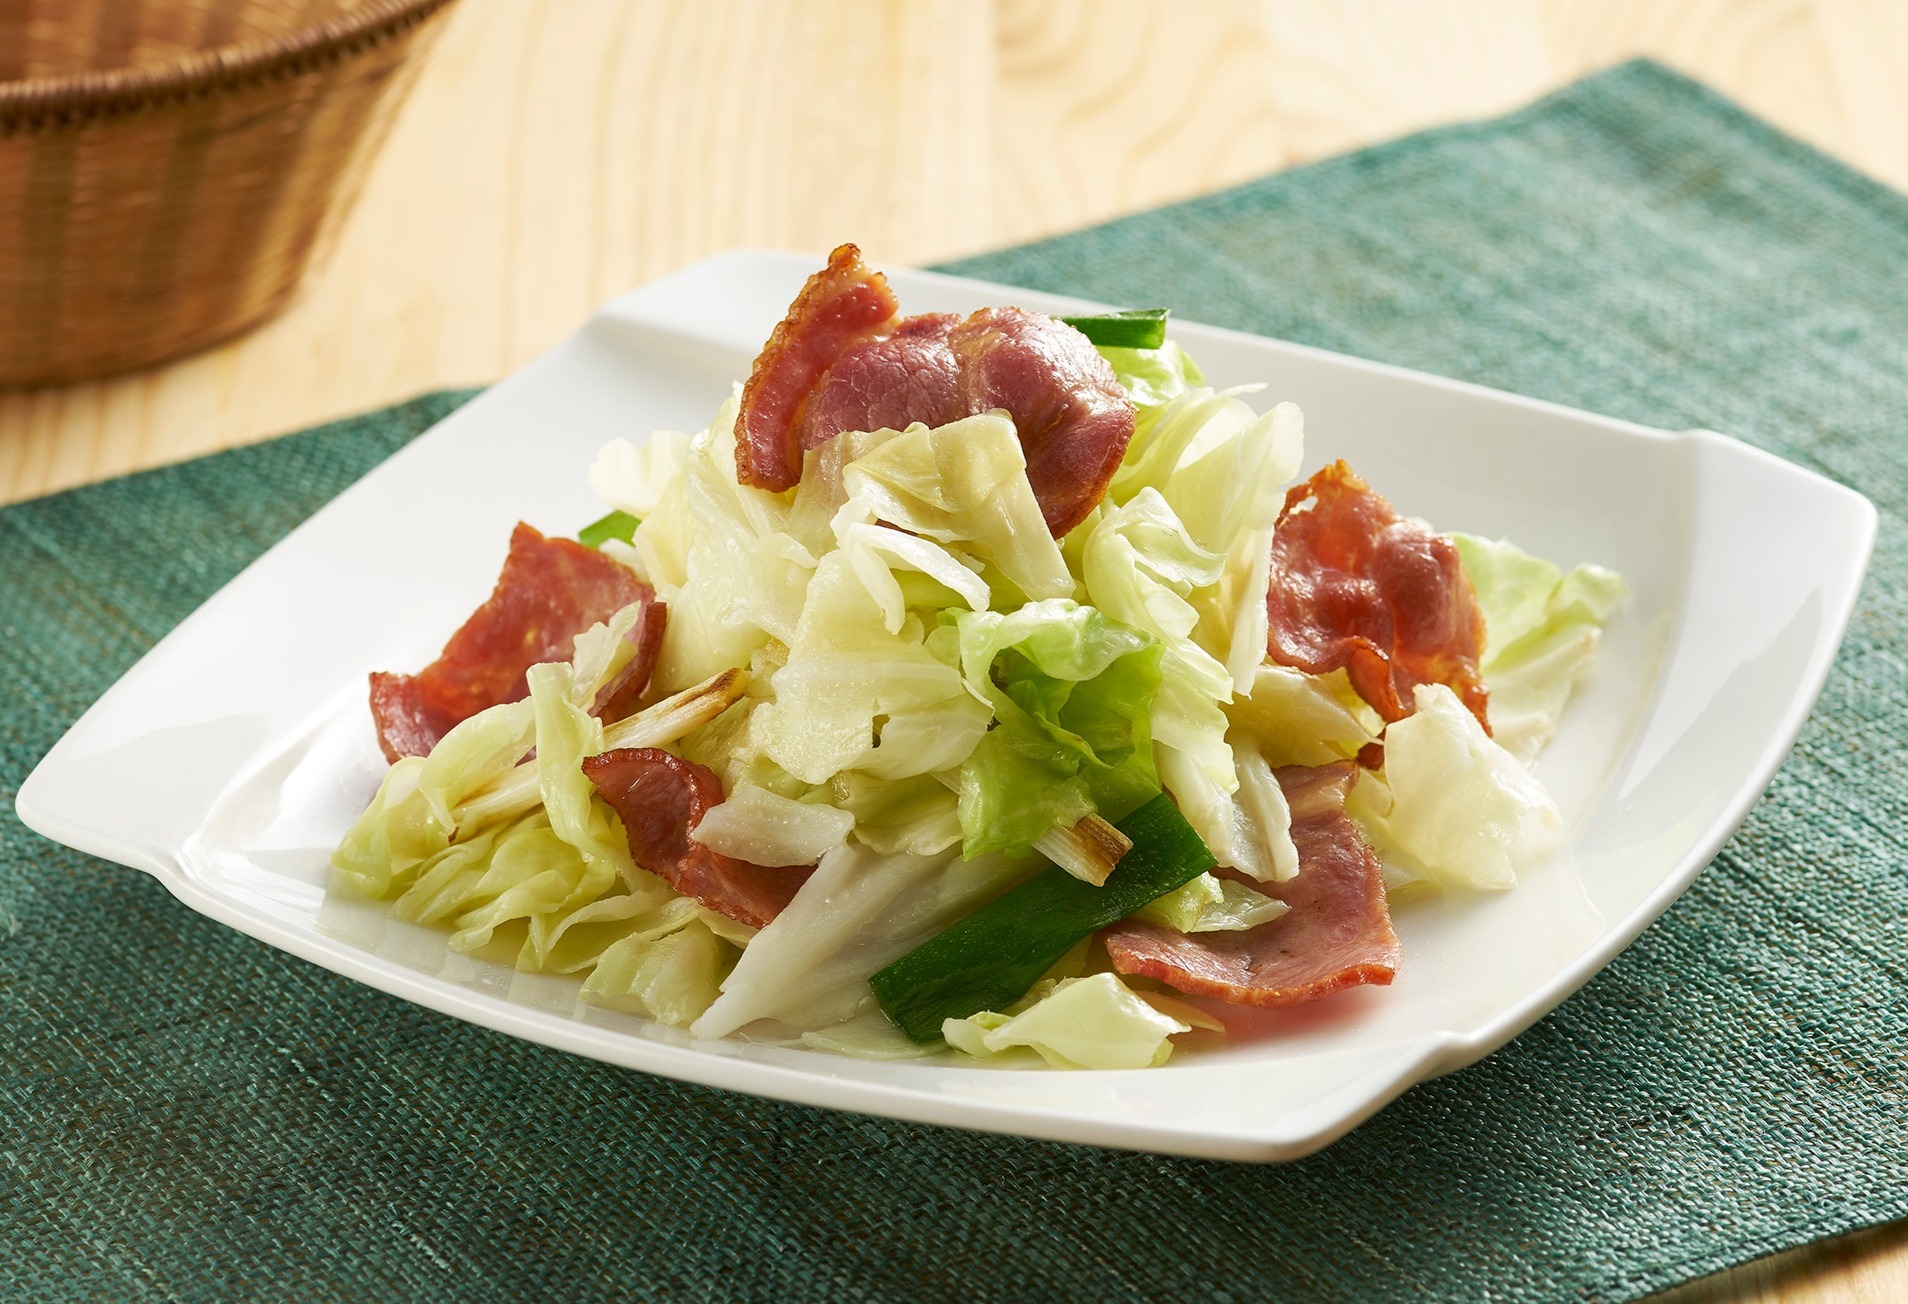 Stir-fried Cabbage with Bacon